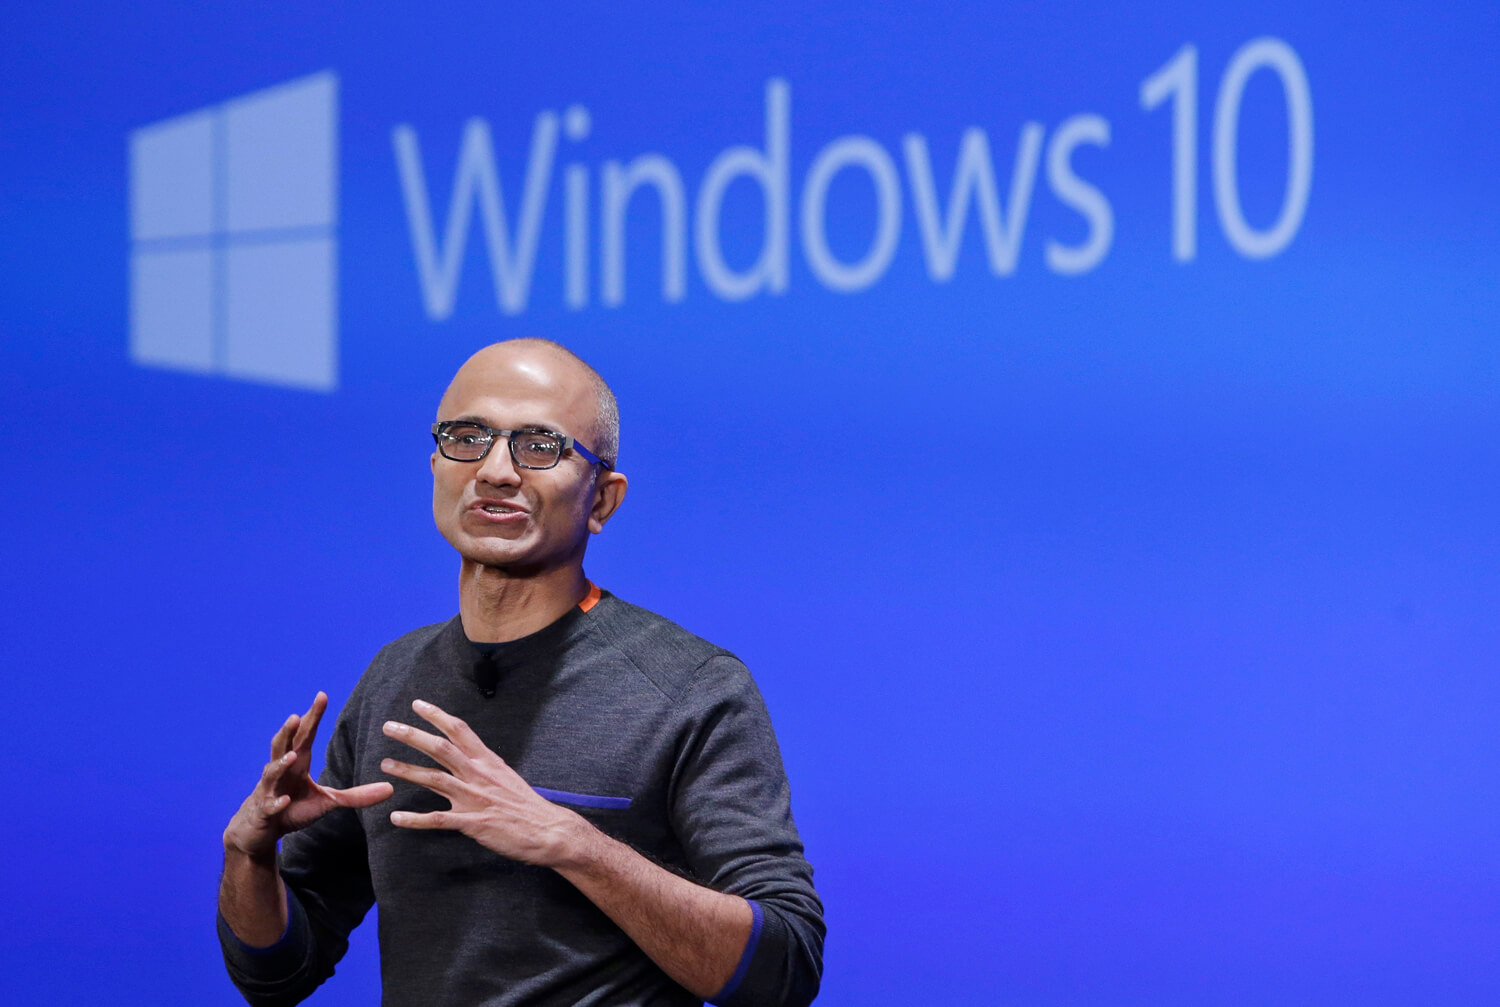 MICROSOFT URGED TO EXTEND WINDOWS 10 SUPPORT AMID FEARS OF E-WASTE CRISIS